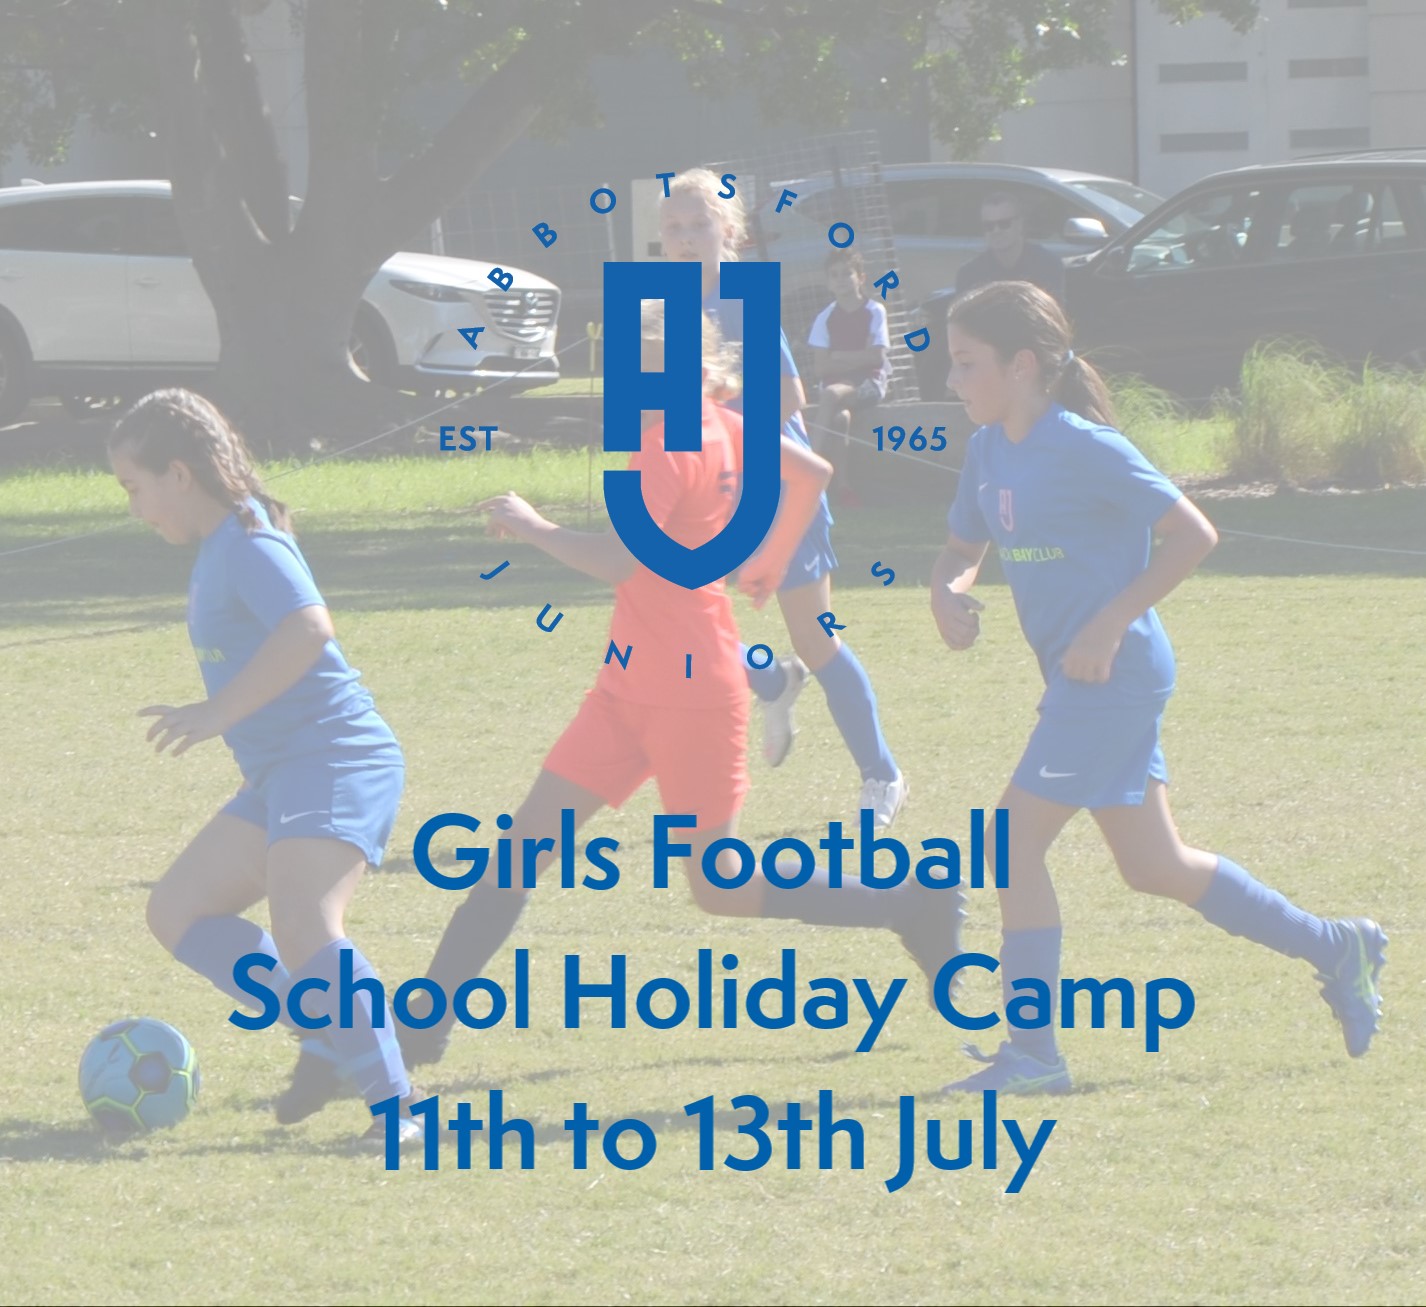 Girls Football School Holiday Camp - 11th to 13th July